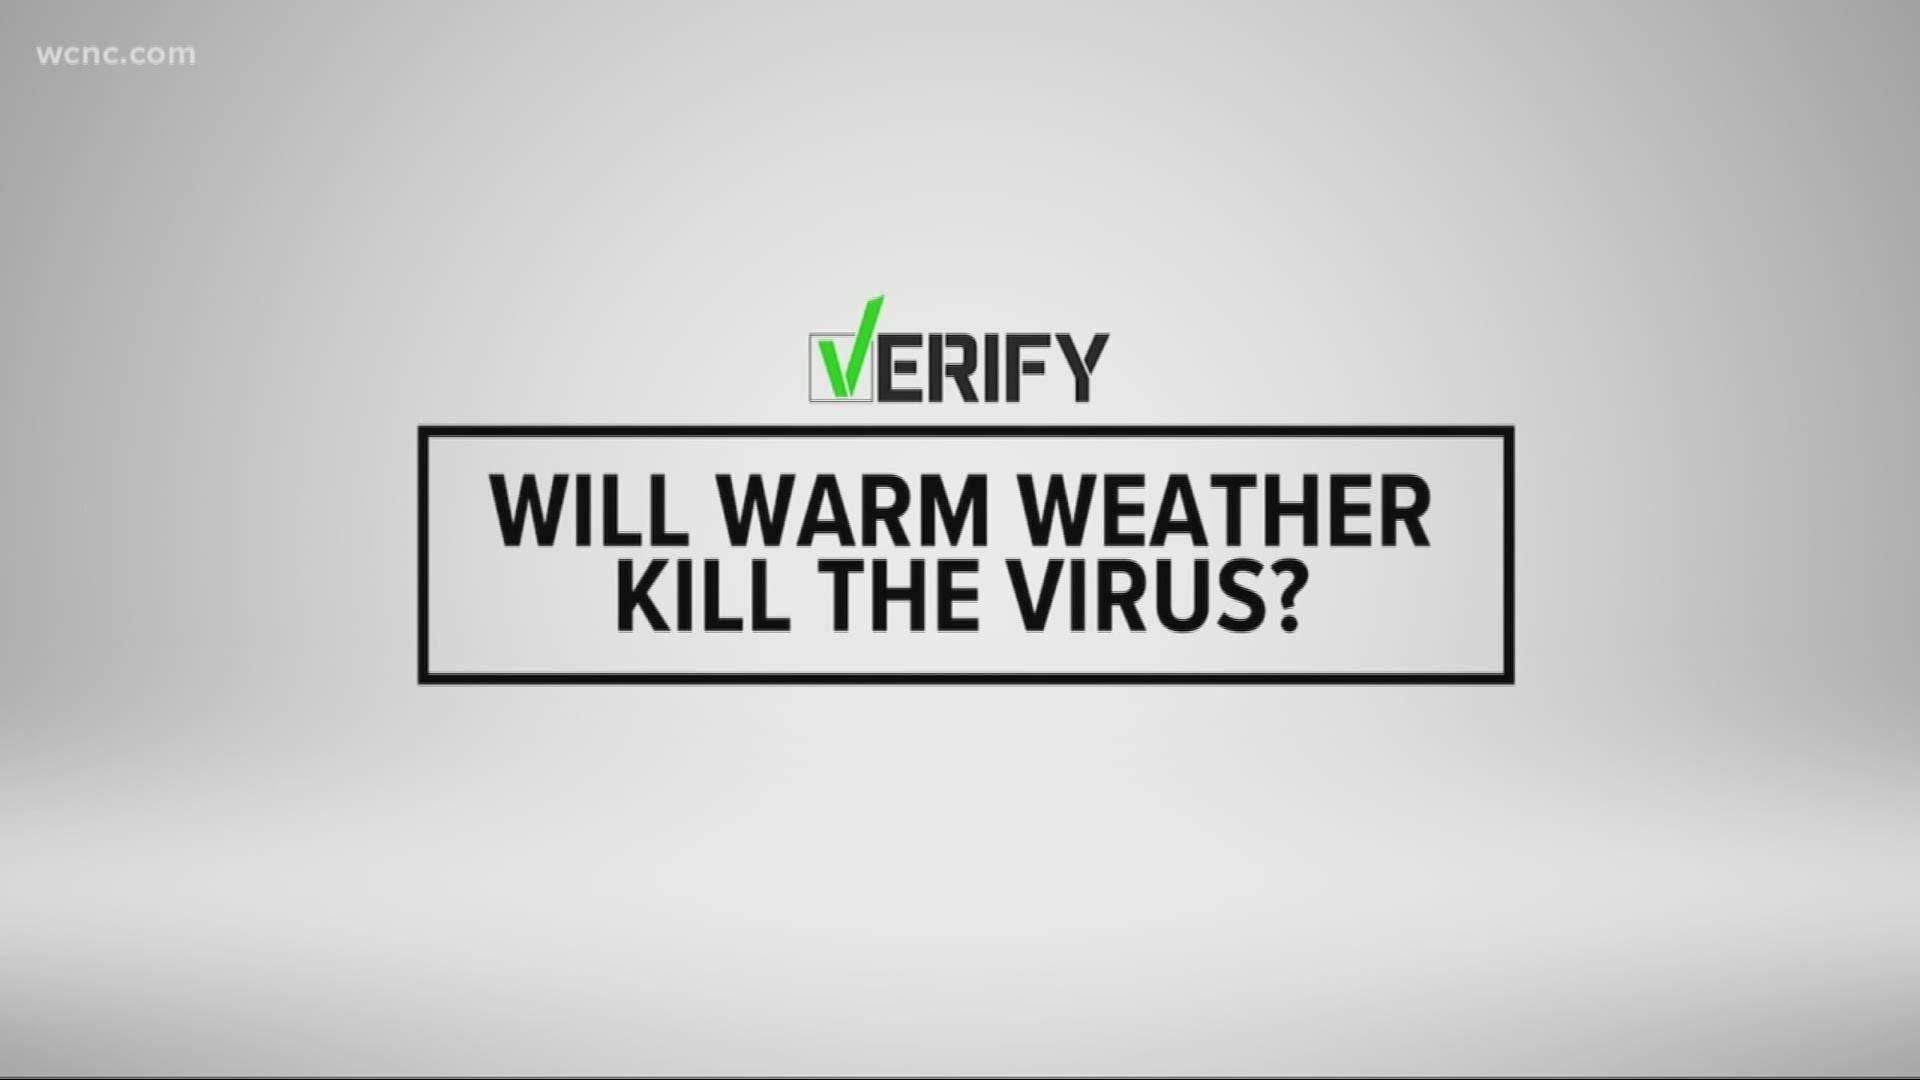 There are hundreds, if not thousands of claims circulating social media about coronavirus. But one says warmer weather will kill the virus. Is it true?